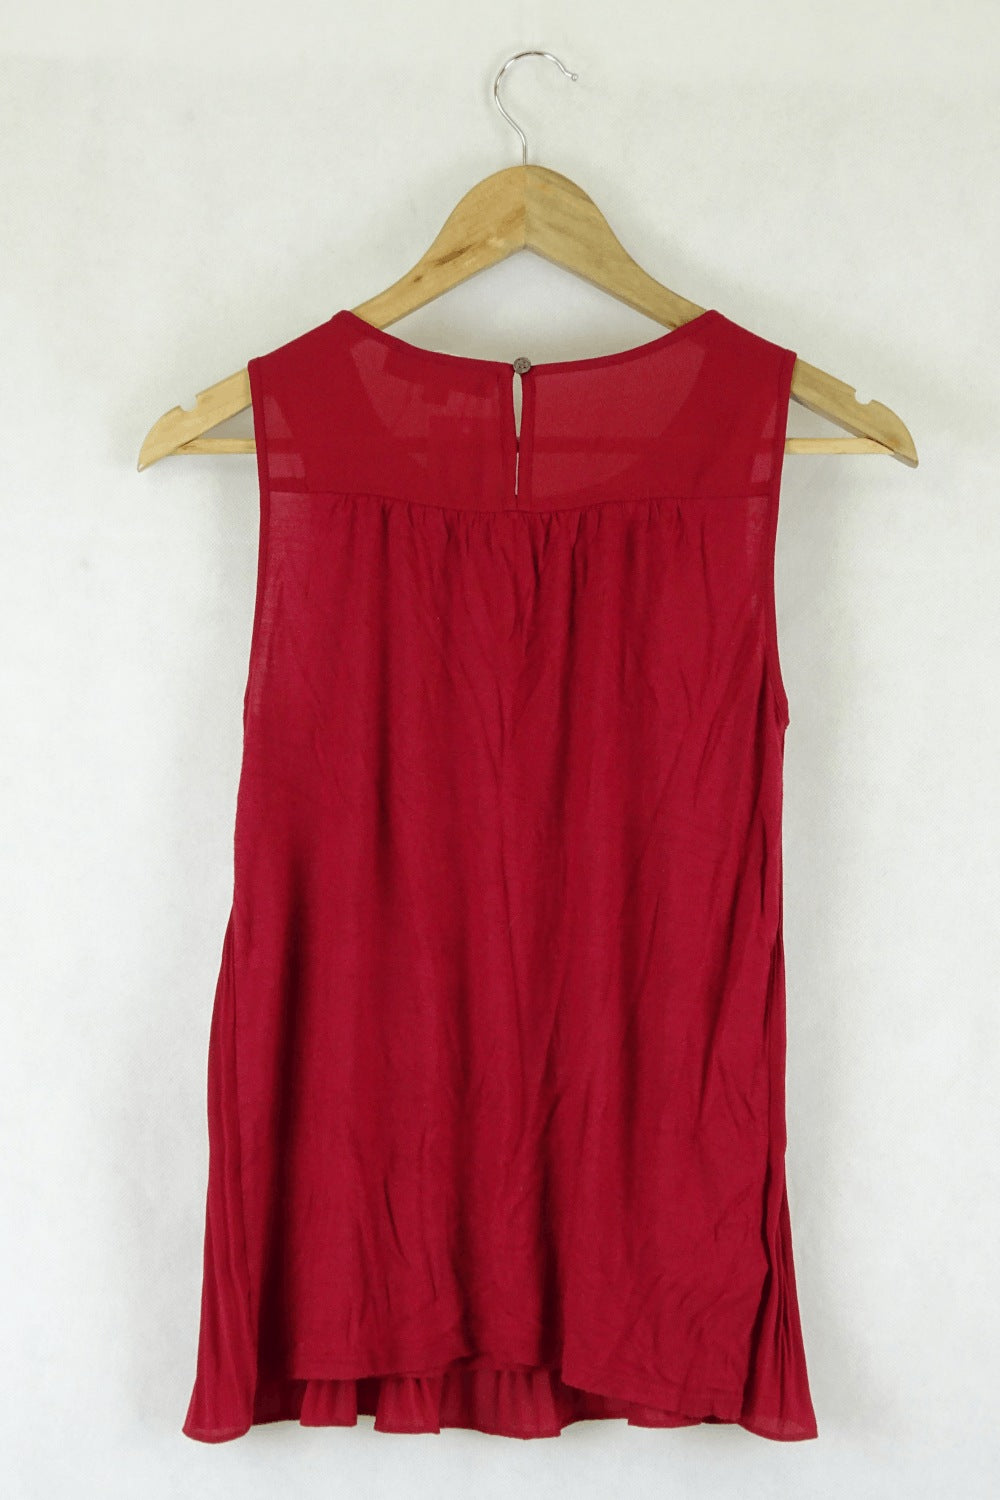 The Loft Red Pleated Top XS